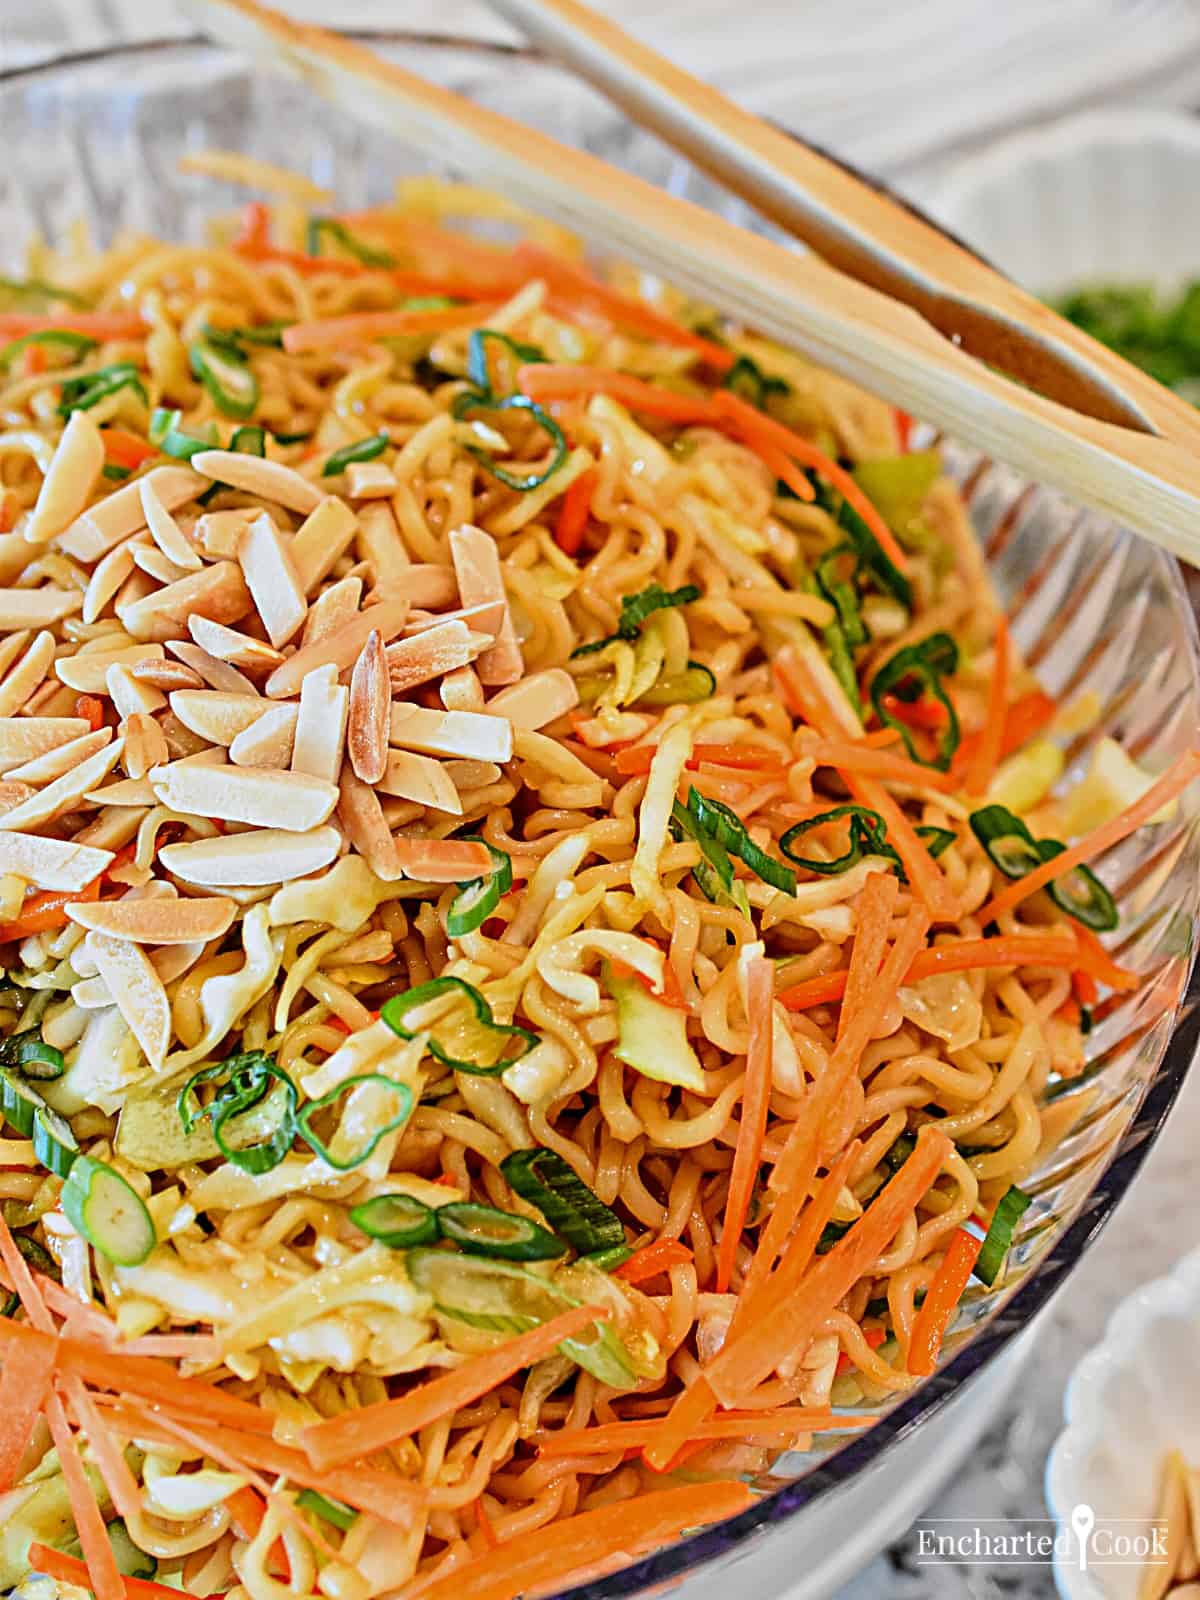 Close-up view of the salad in a large clear bowl with chopsticks.